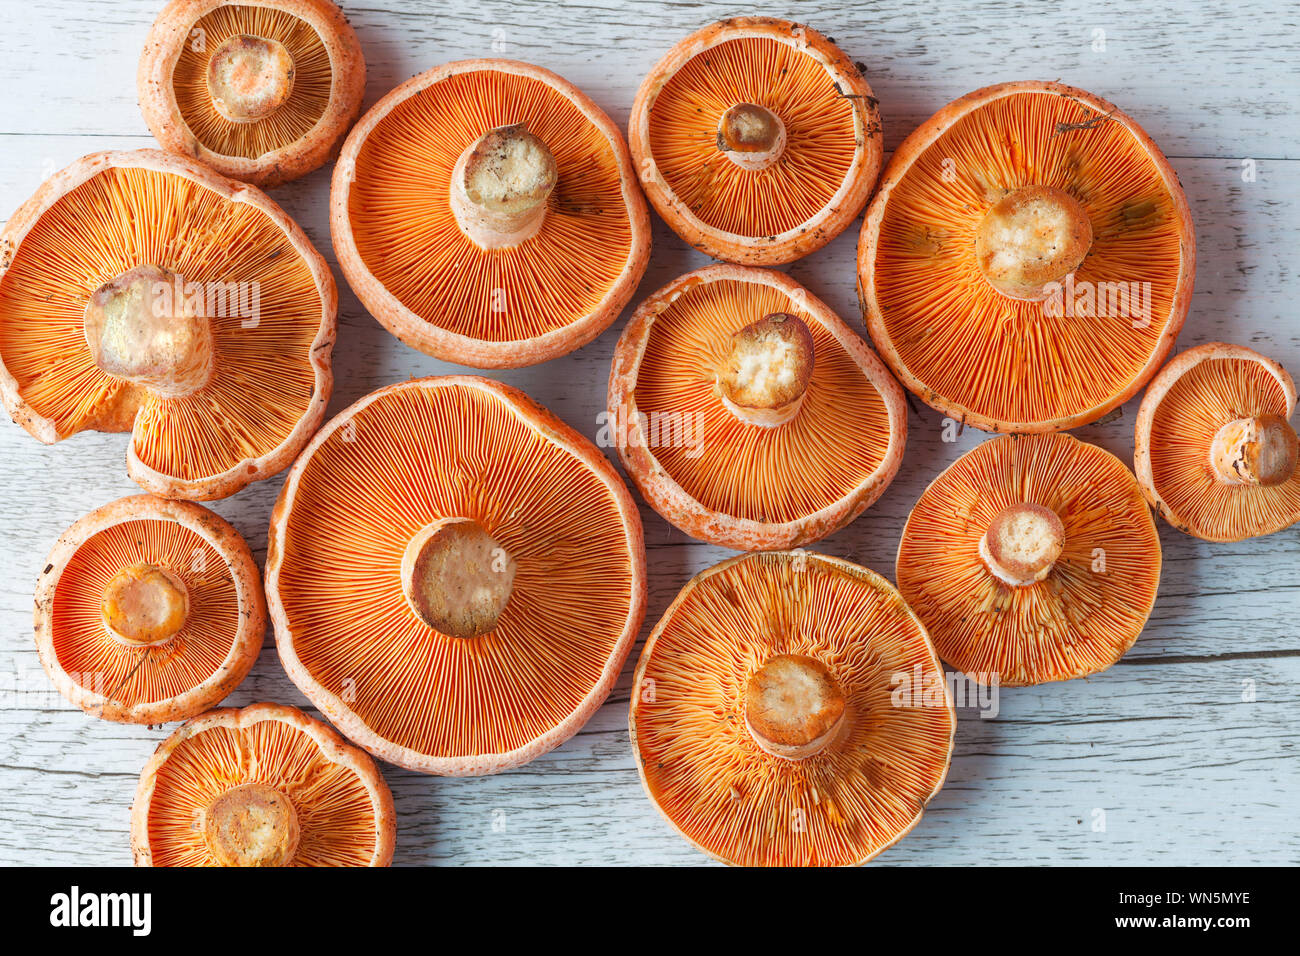 Directly Above Shot Of Edible Mushrooms On Table Stock Photo